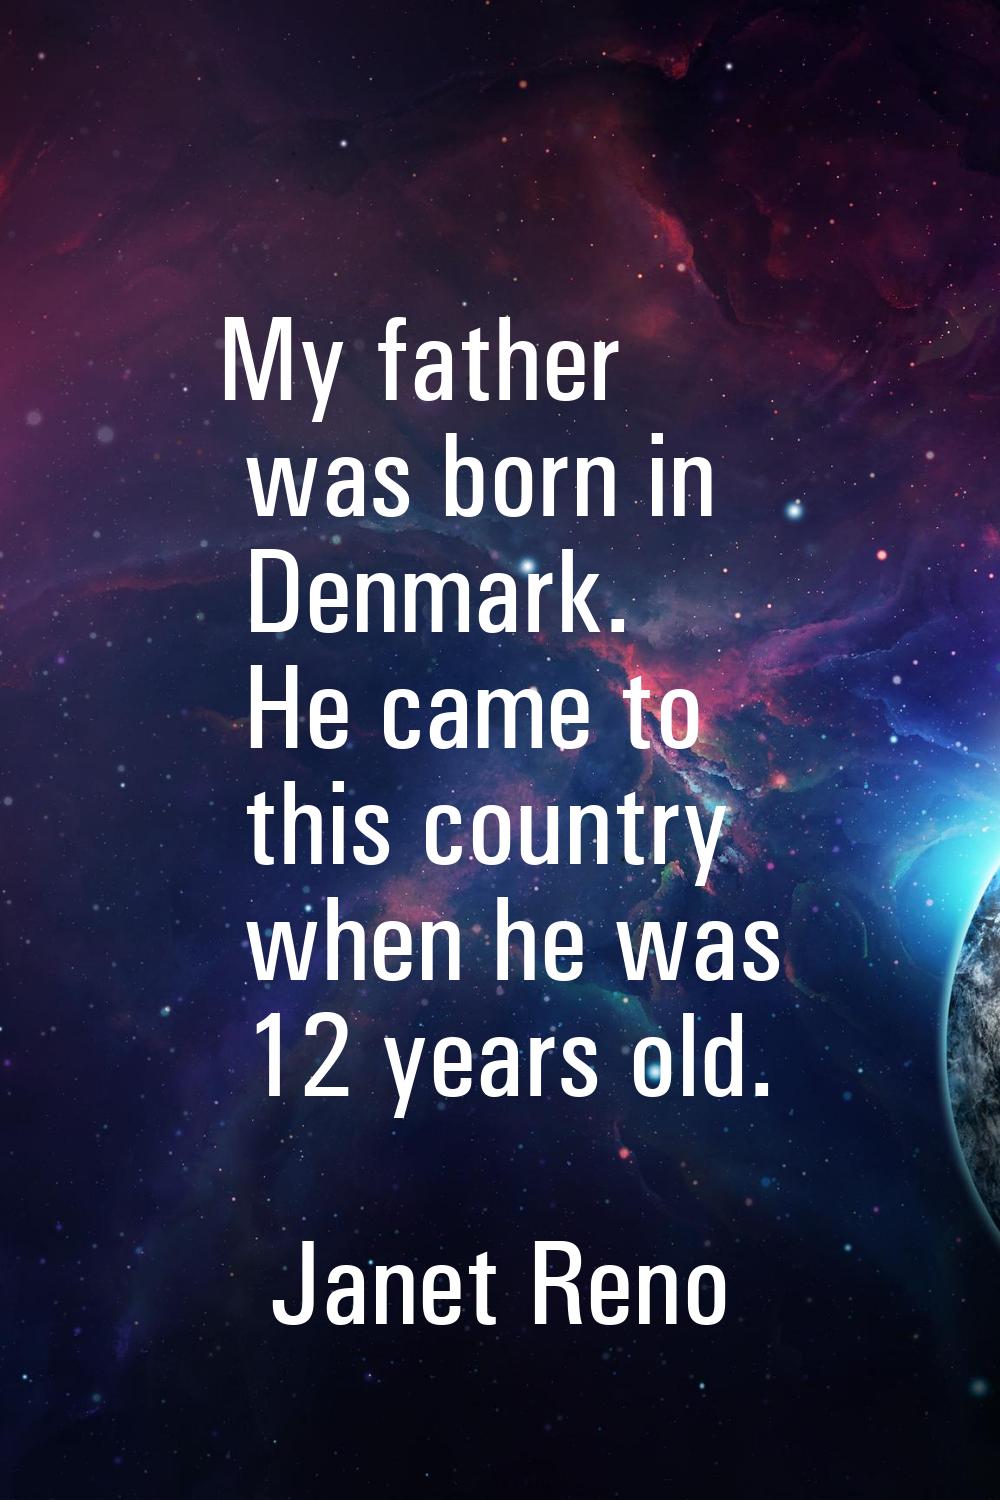 My father was born in Denmark. He came to this country when he was 12 years old.